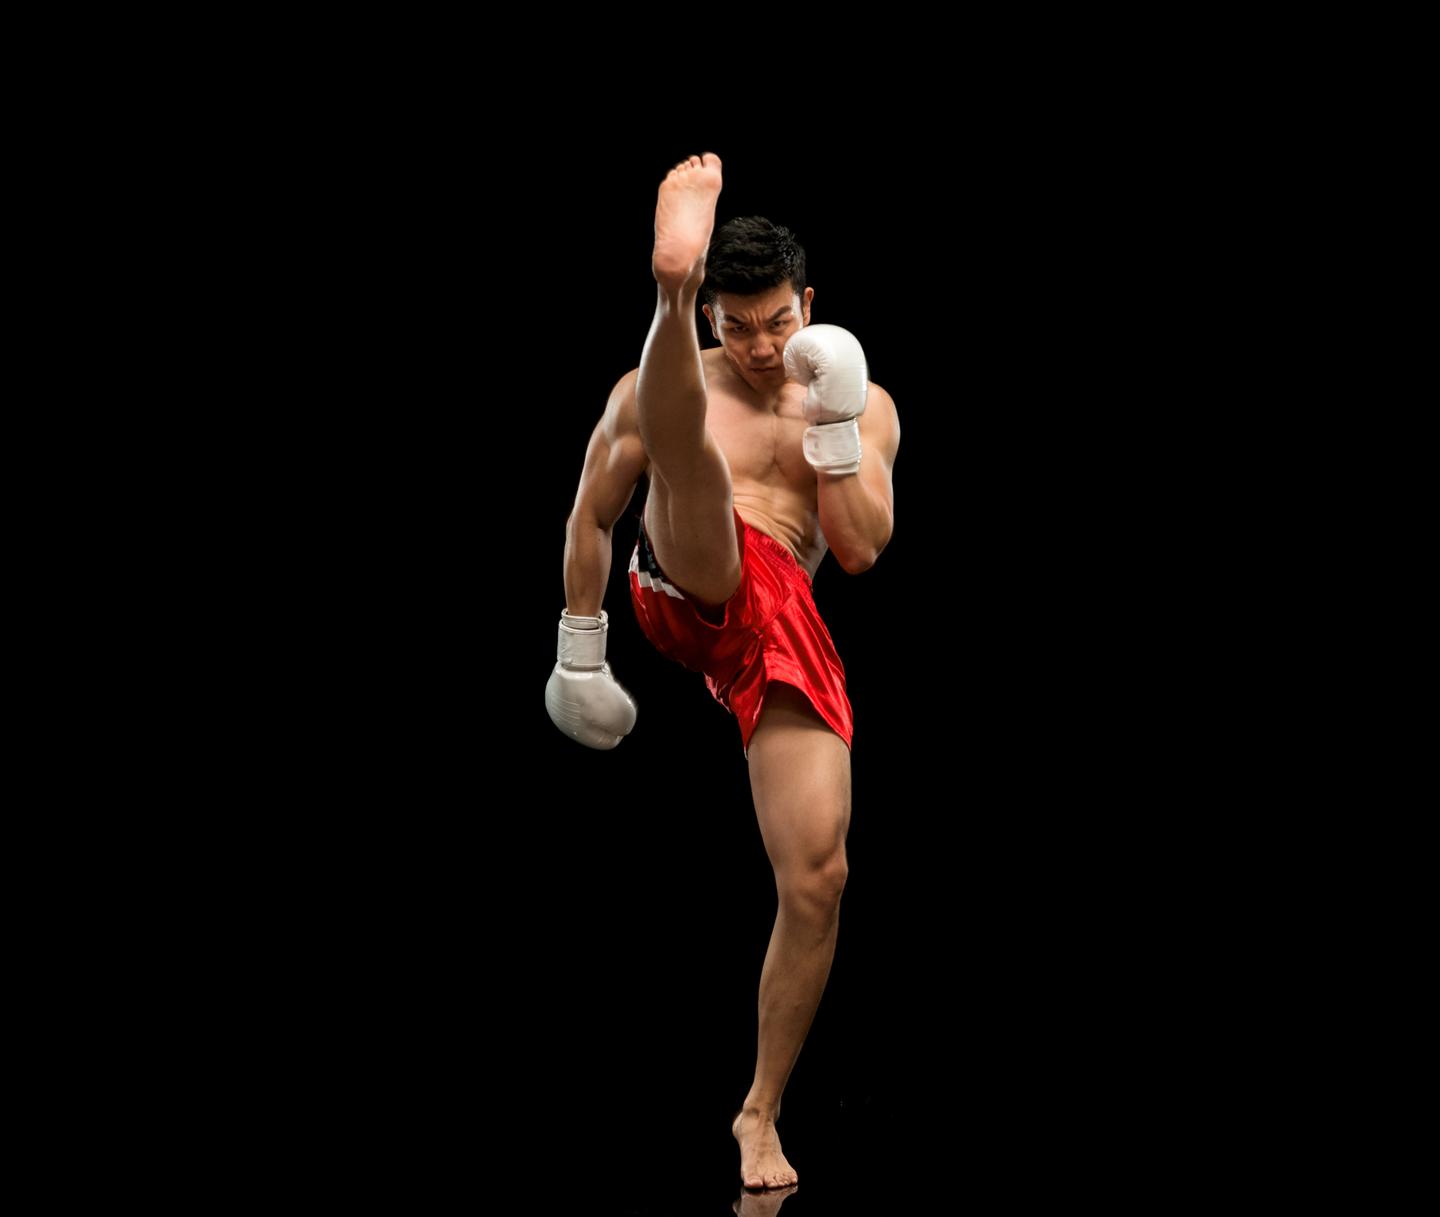 ISSA, International Sports Sciences Association, Certified Personal Trainer, Kickboxing, Glutes, Cardio + Strength: Try Kickboxing for Better Glutes, Front Kick